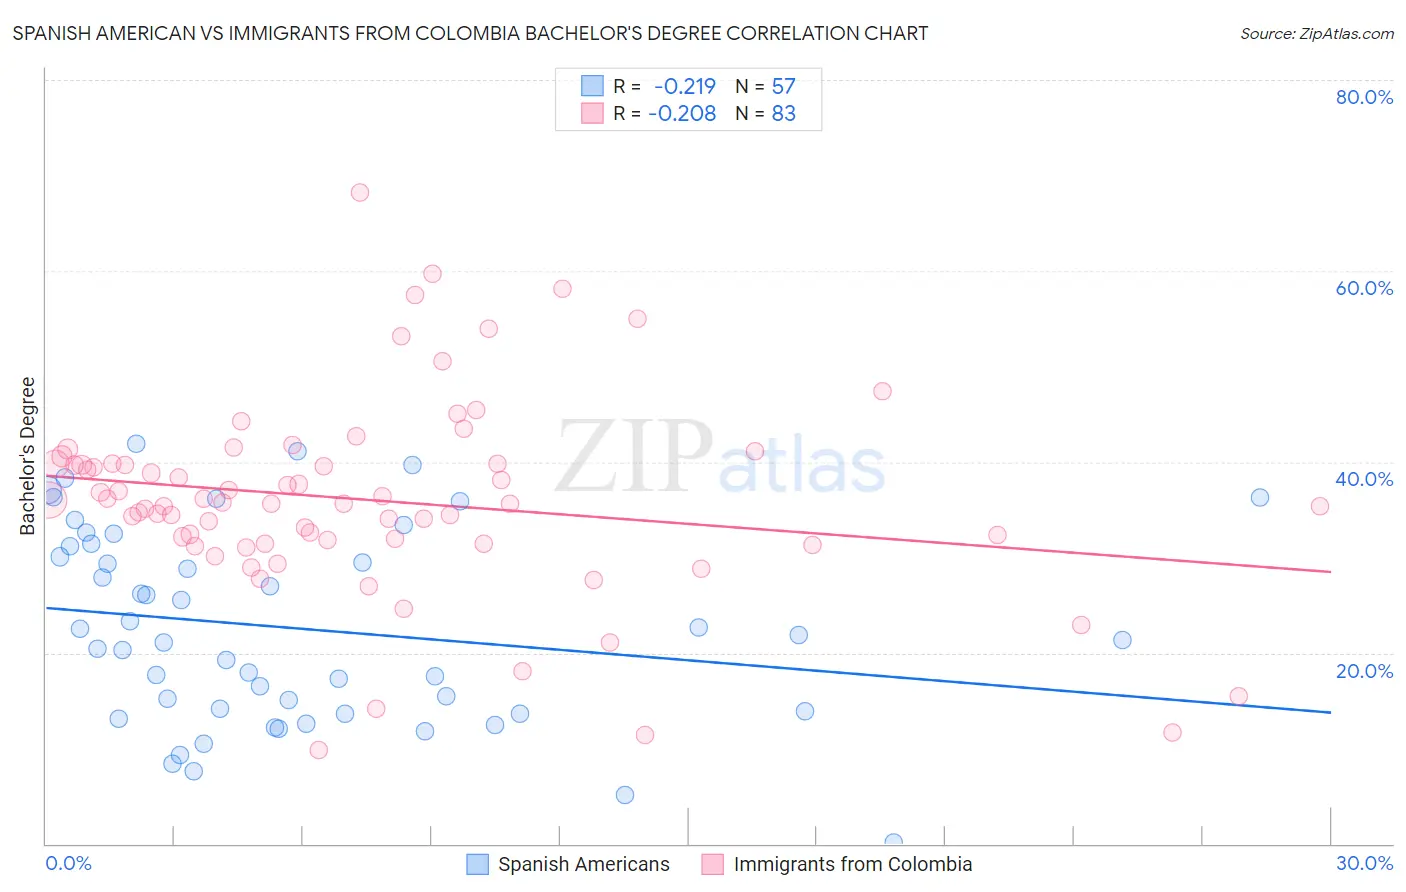 Spanish American vs Immigrants from Colombia Bachelor's Degree